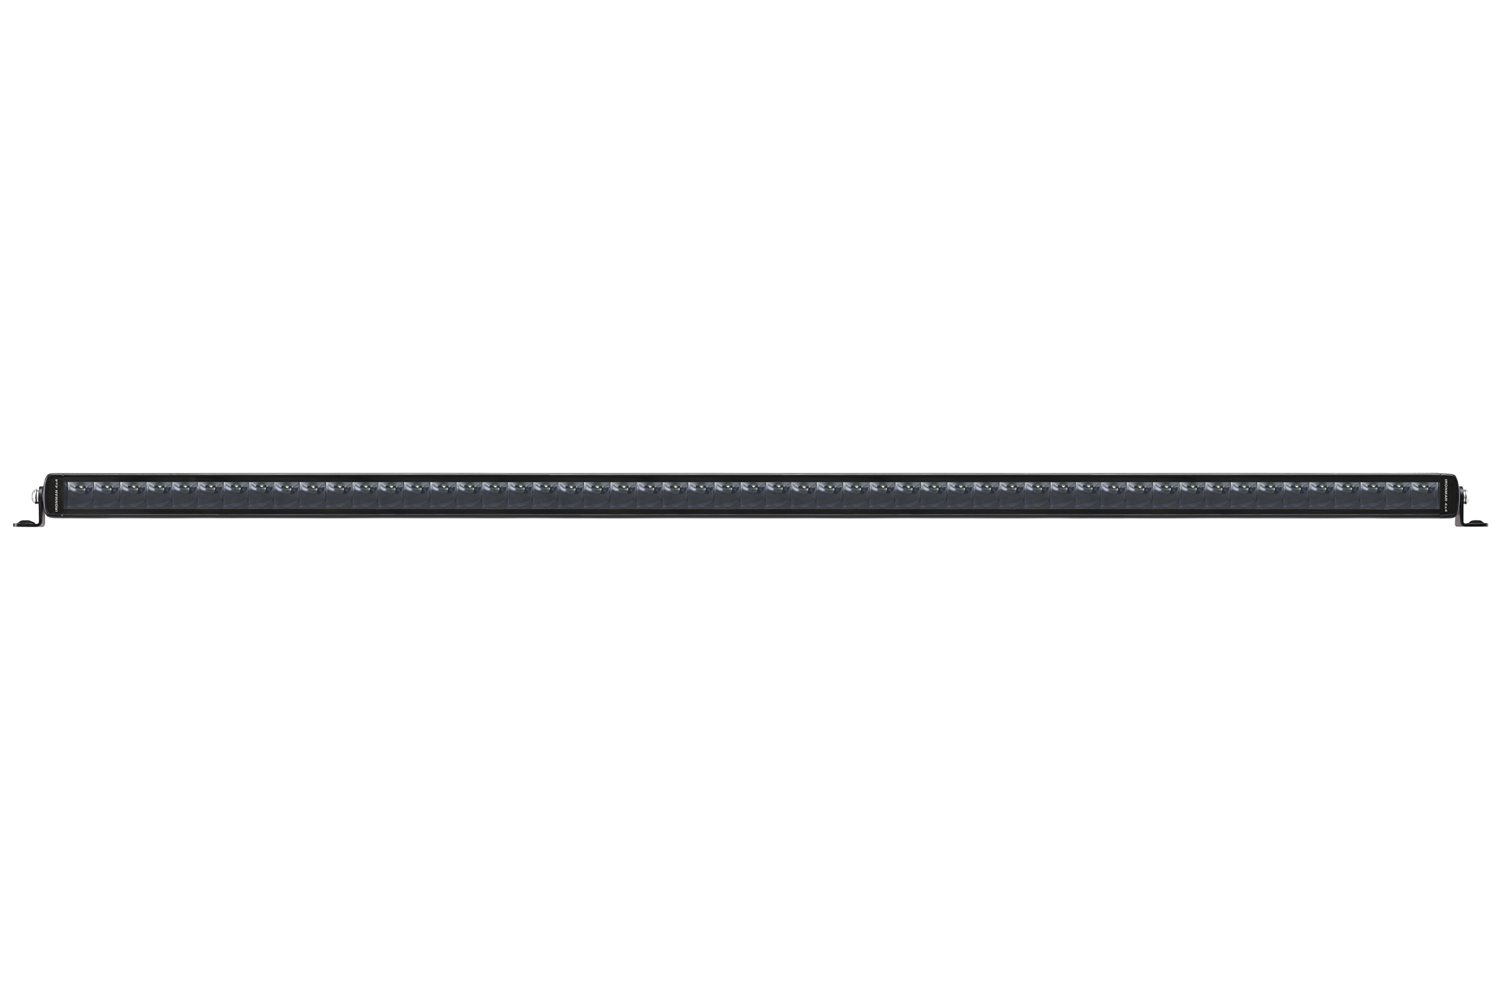 Bright Saber-X LED Single Row Light Bar - 50" Questions & Answers